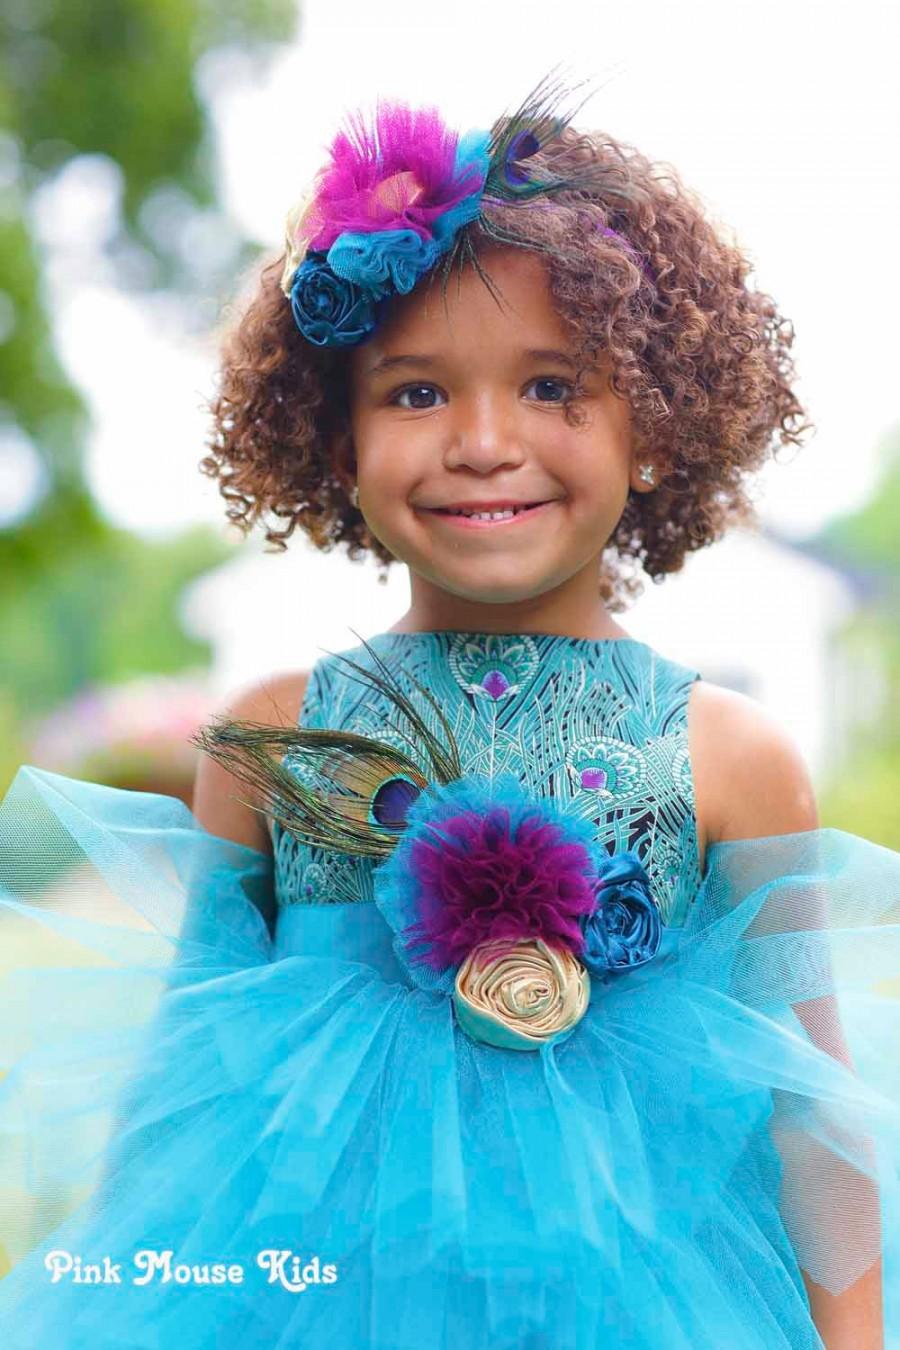 Mariage - Peacock Flower Girl Dress - Peacock Wedding - Custom Flower Girl Dresses - Flower Girl Dress - Flower Girl Tulle Dress - Sizes 2T to 8 Years